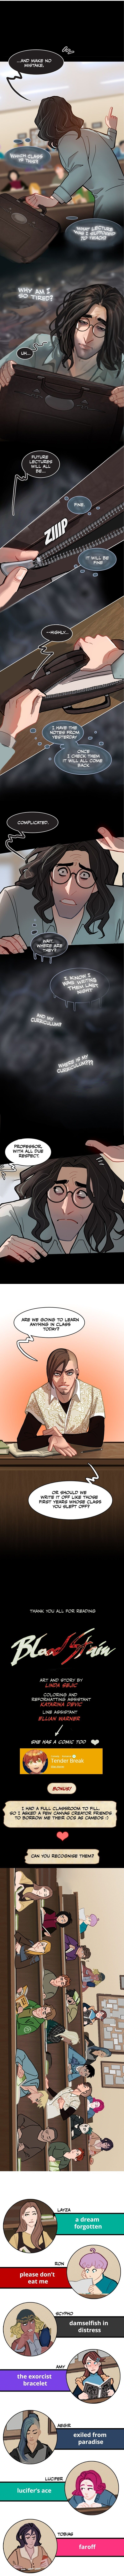 Blood Stain ch. 4 (ongoing) [Linda Sejic / Sigeel] 30